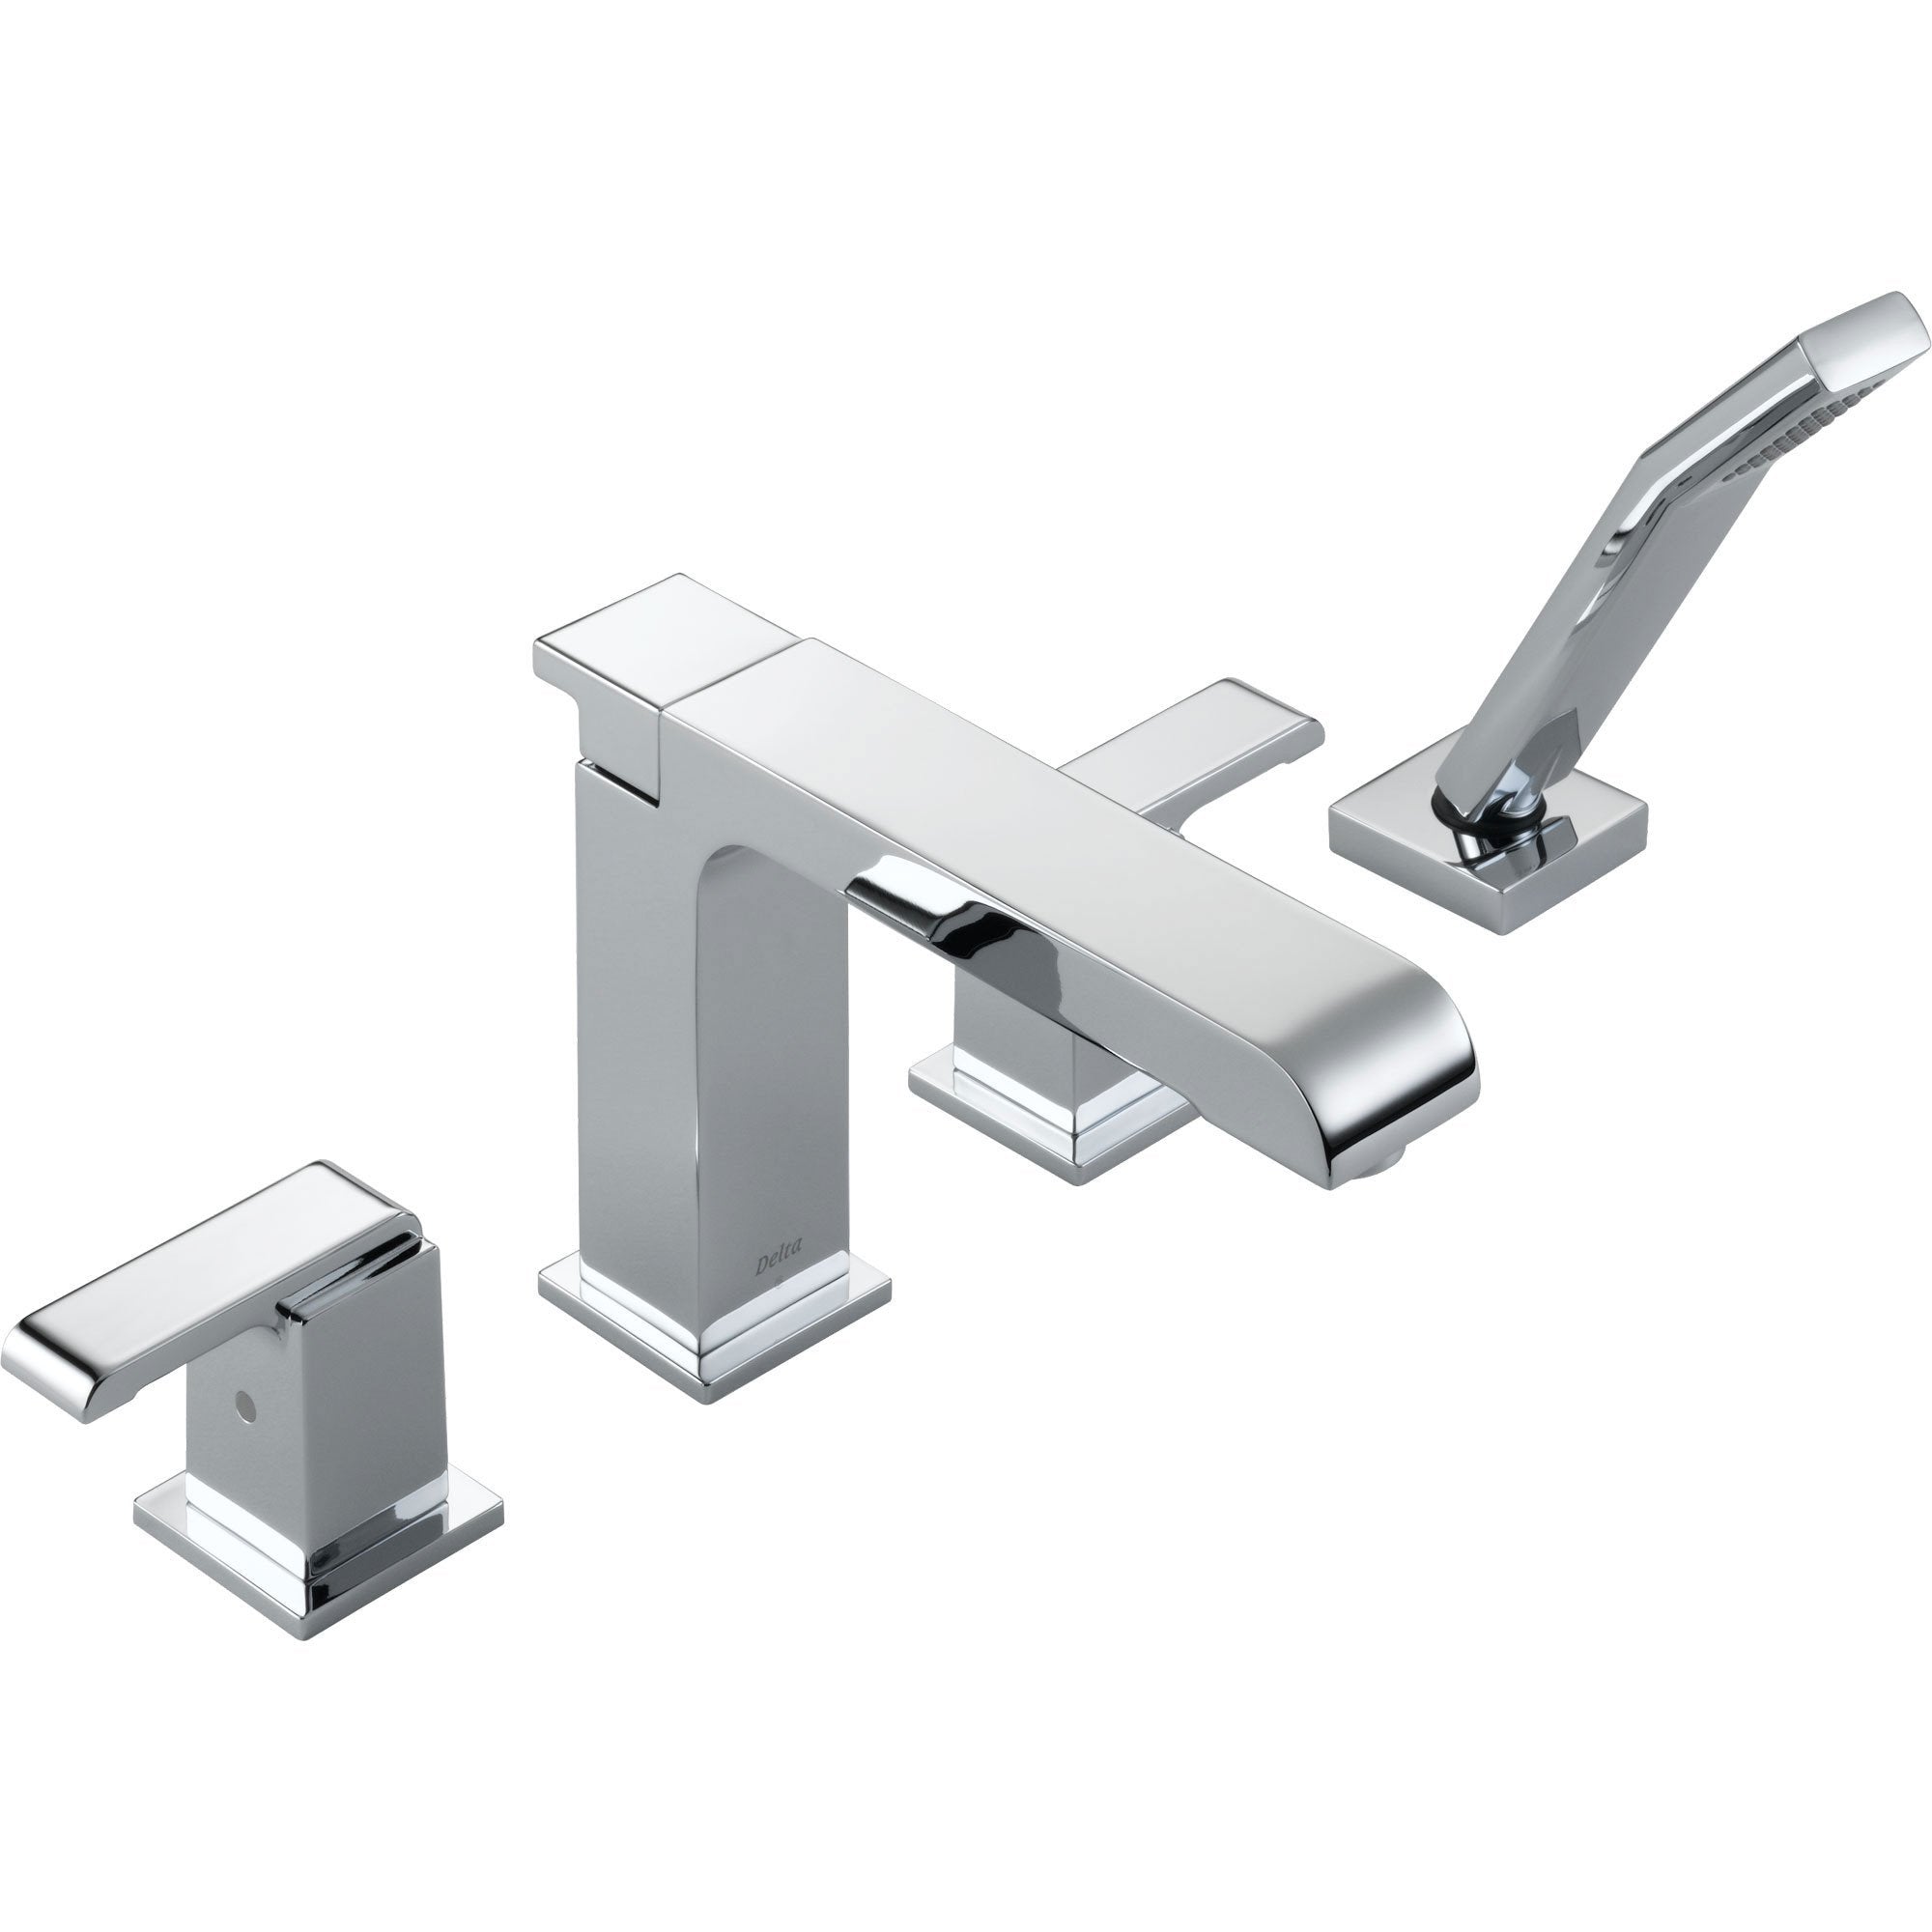 Delta Arzo Modern Square Chrome Roman Tub Faucet with Handshower and Valve D880V